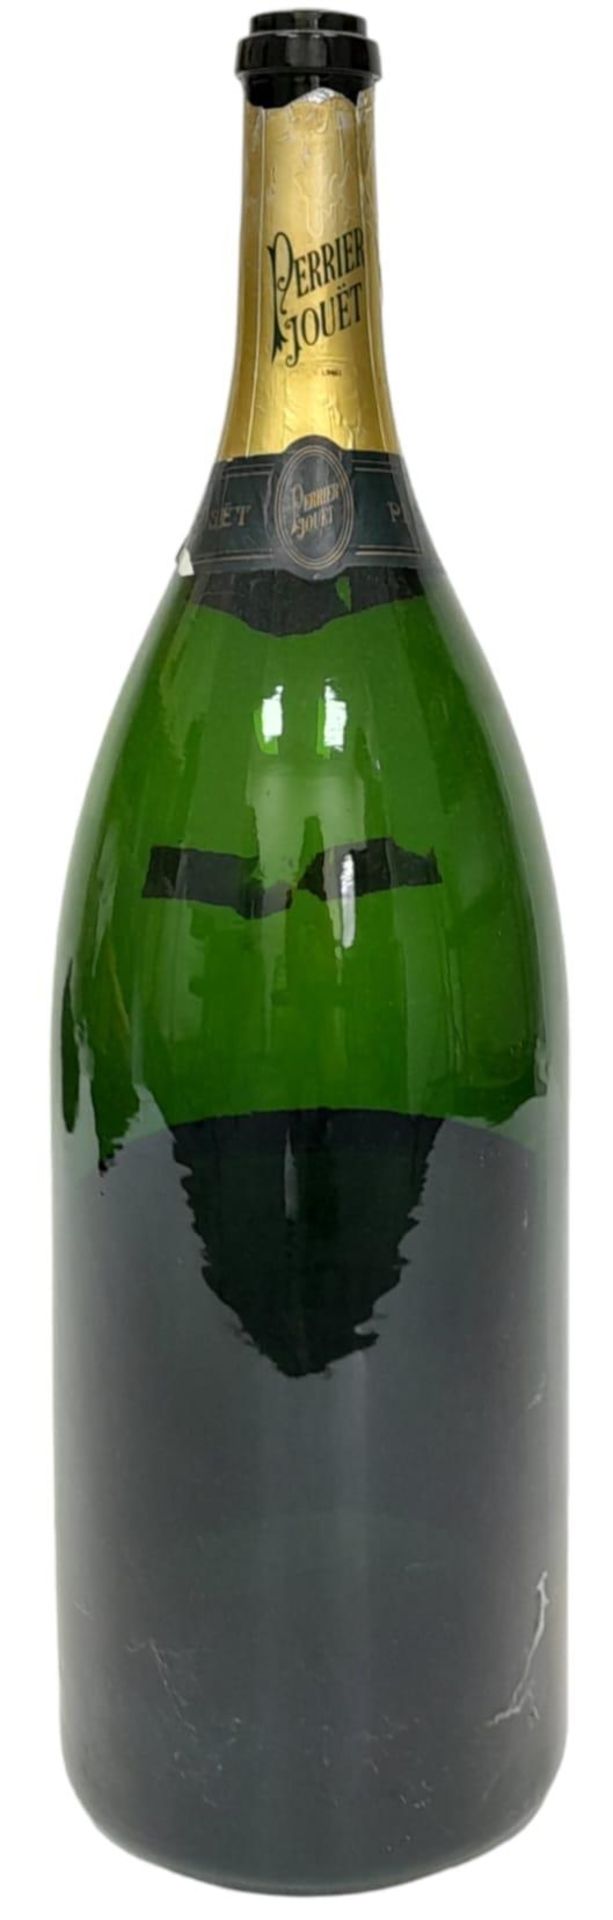 A Salmanazar (12 bottles) of Perrier-Jouet Branded Champagne. Unfortunately the bottle is empty! - Image 6 of 6